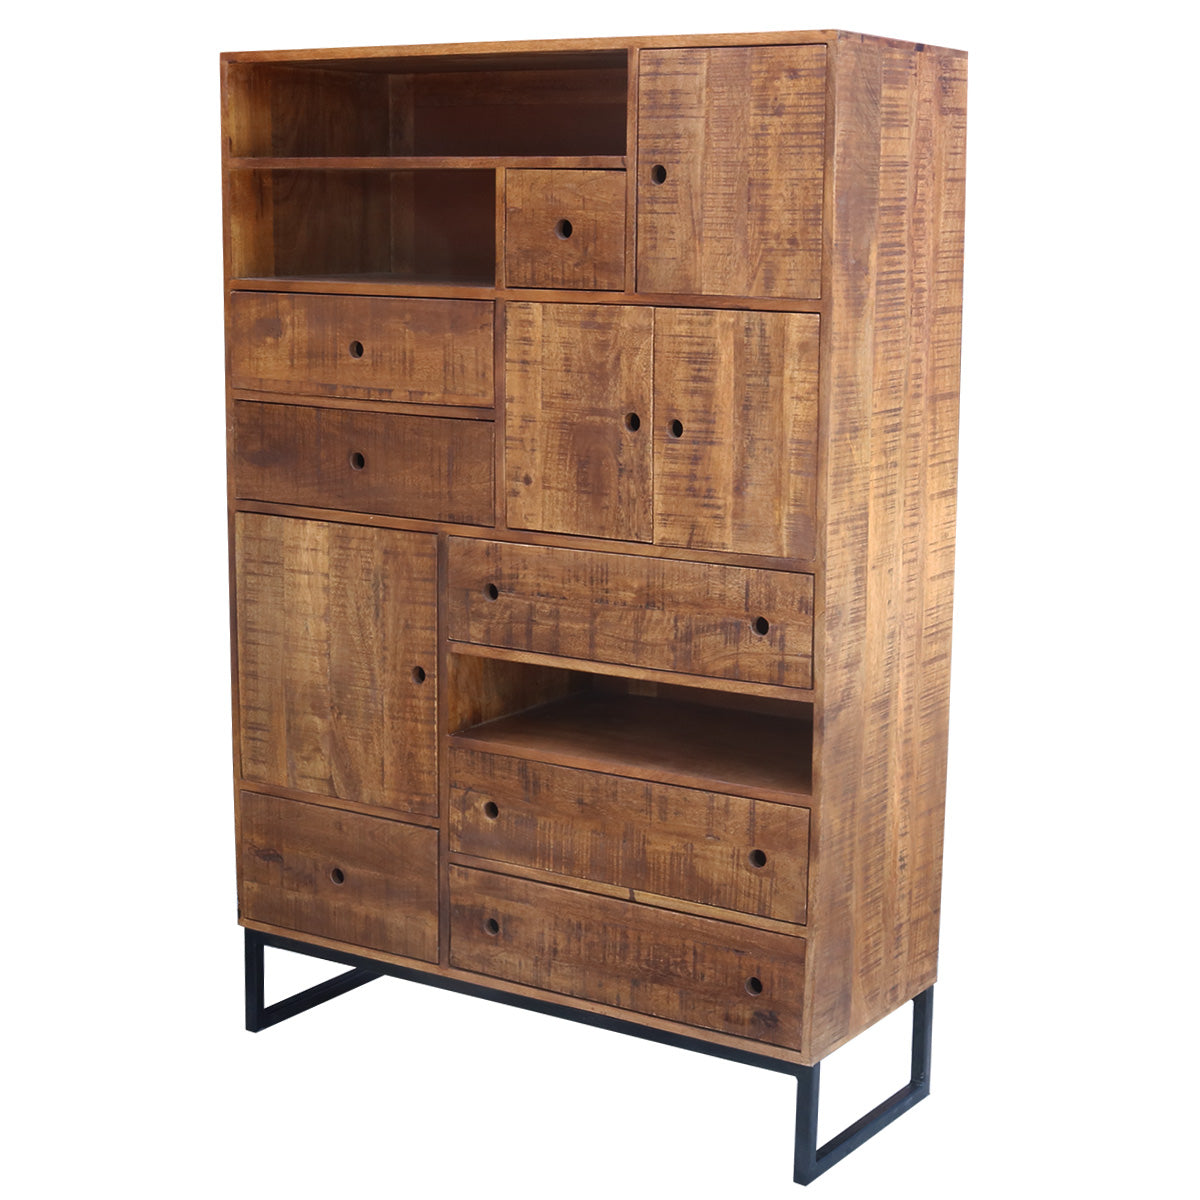 Kick Industrial wall cabinet with drawers Adam